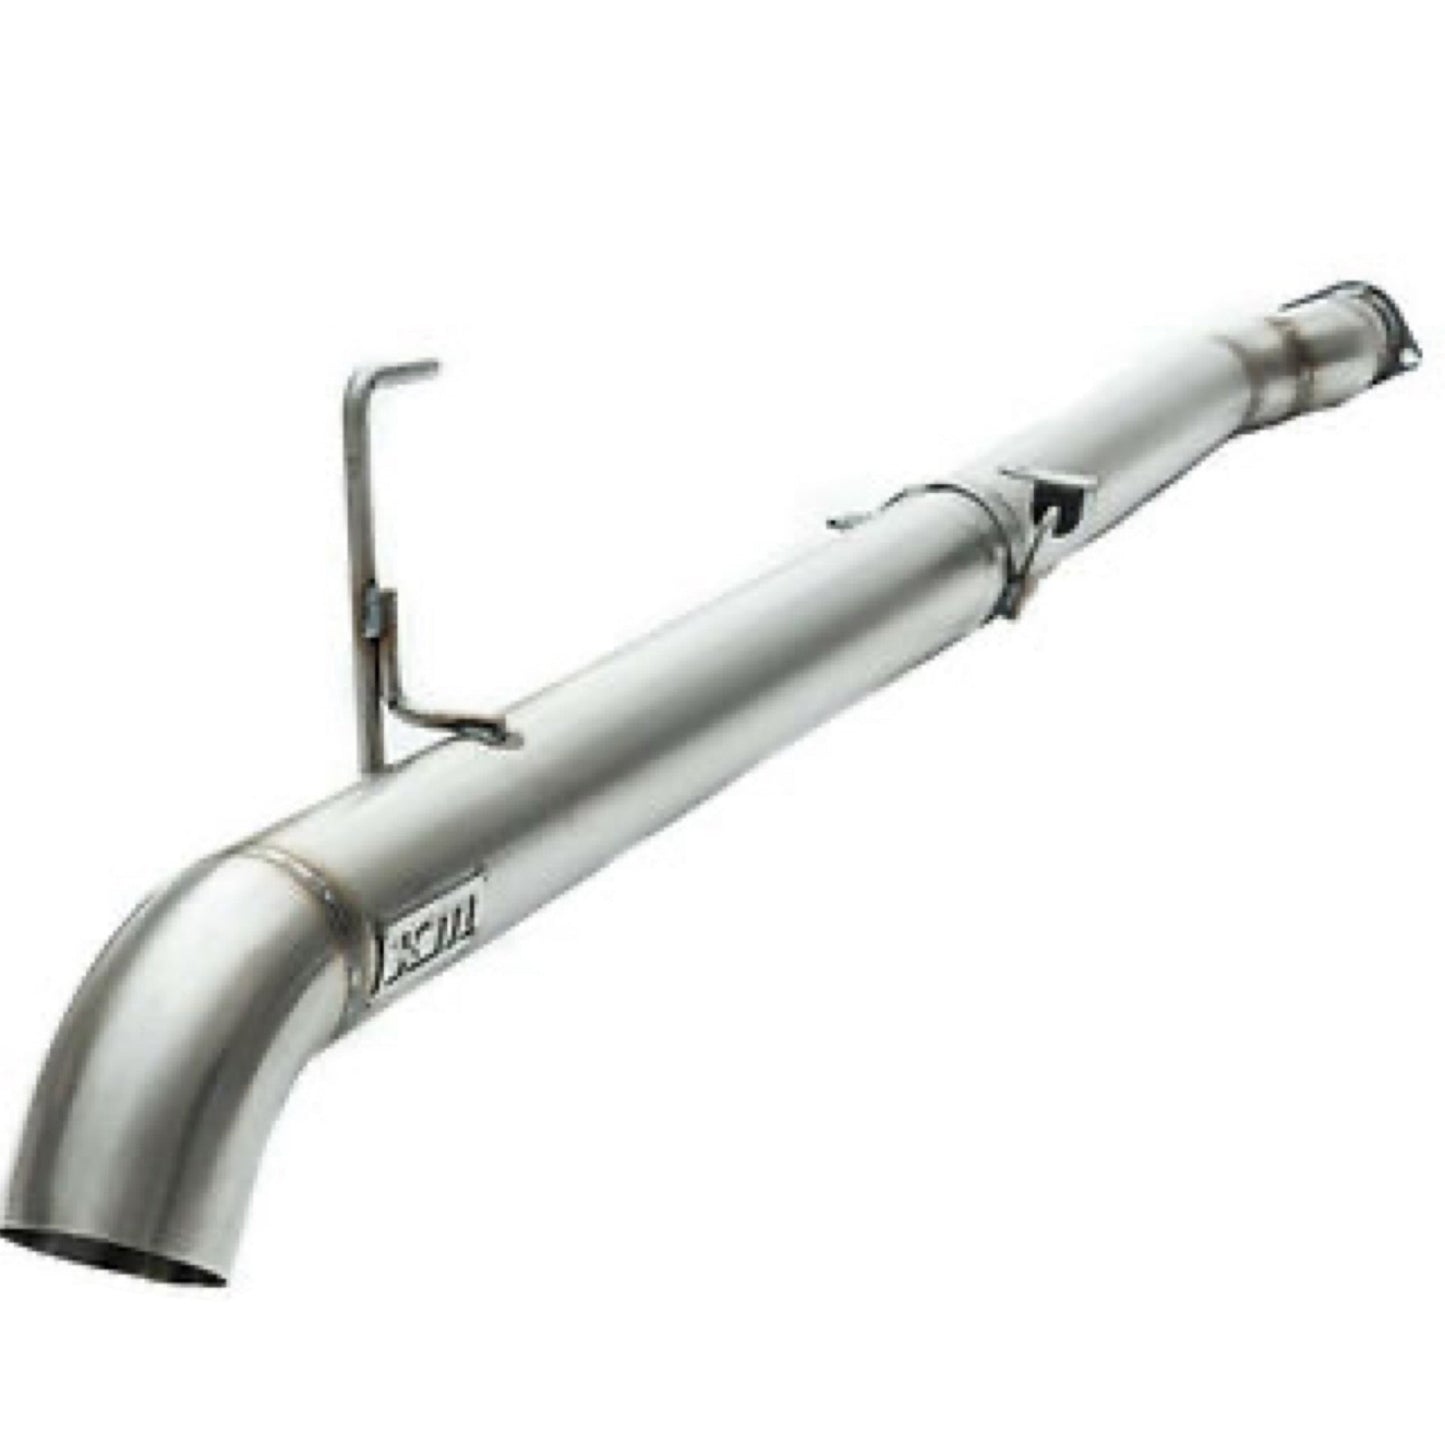 3.5” N80 DPF/TURBO Back 304 Stainless Steel Exhaust System